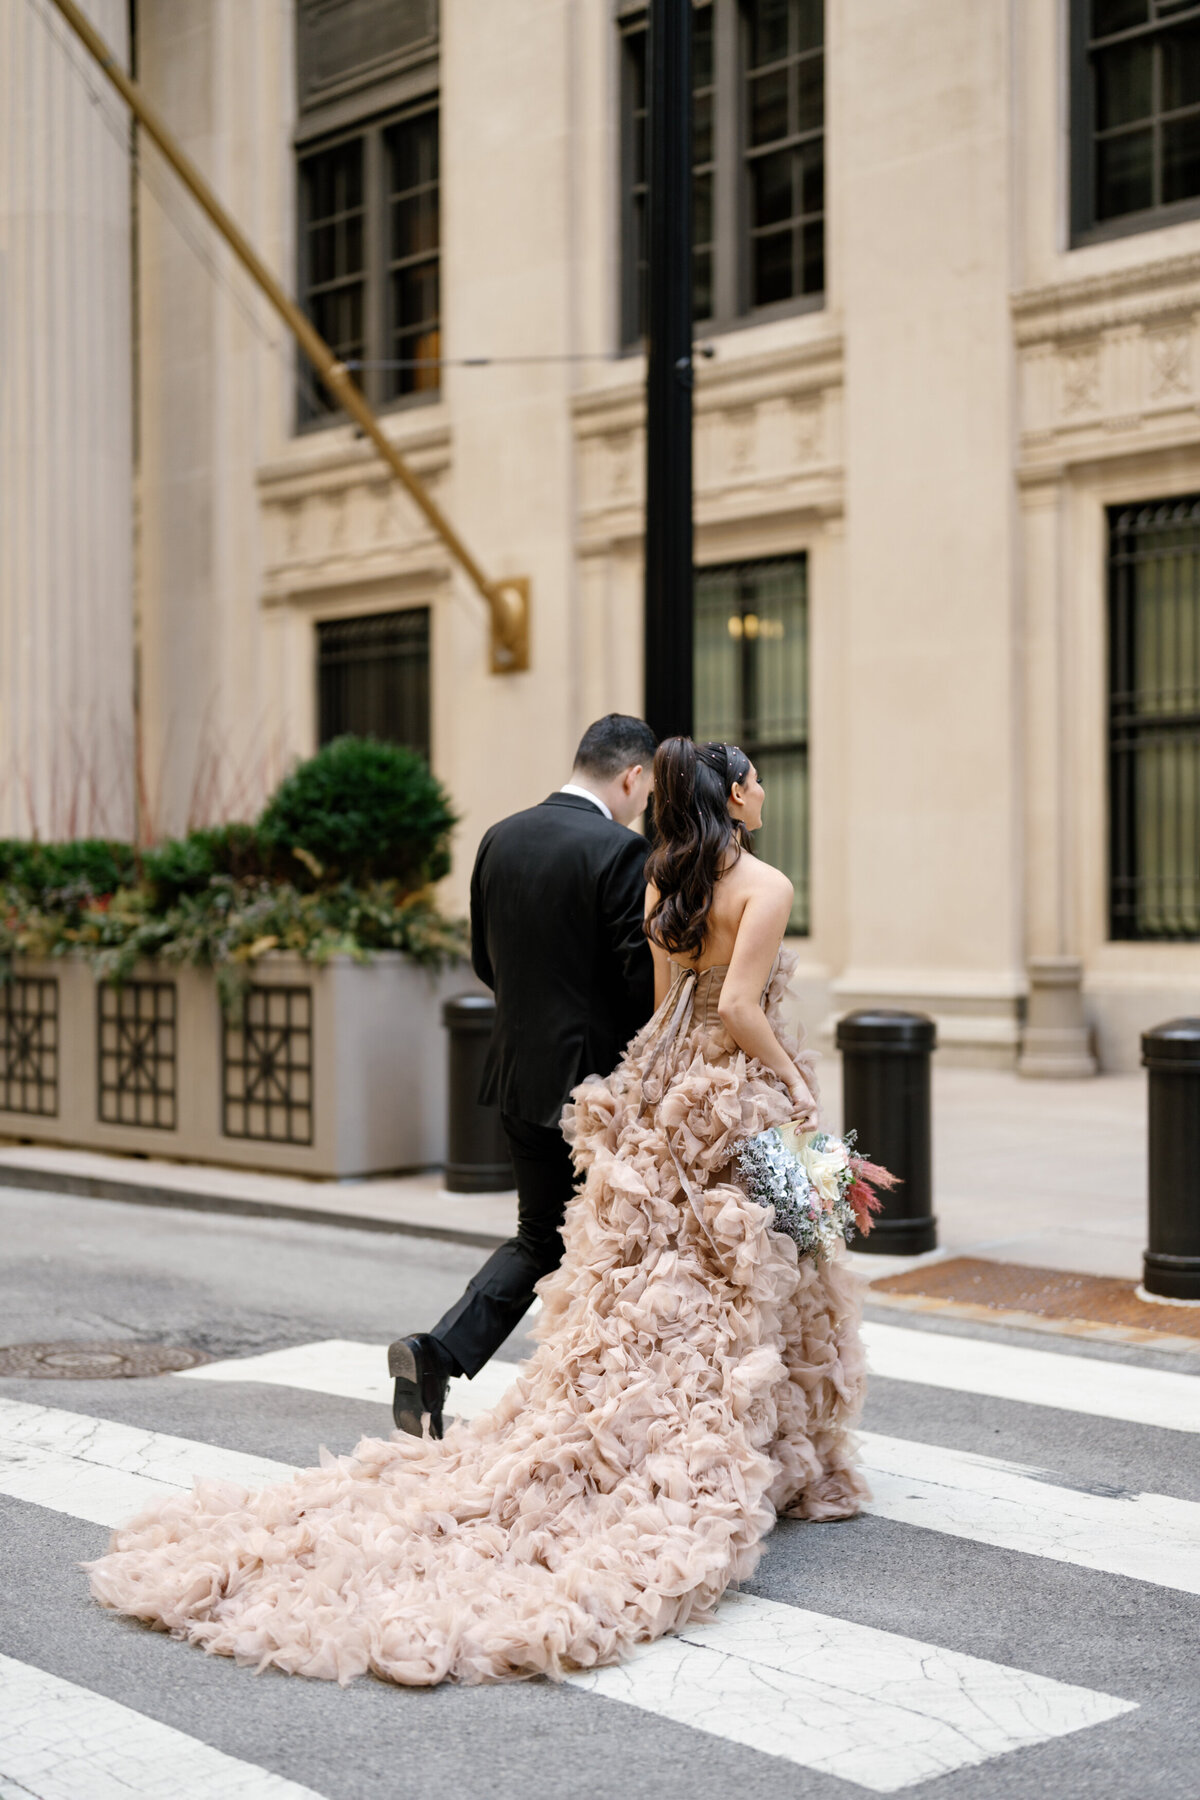 Aspen-Avenue-Chicago-Wedding-Photographer-Rookery-Engagement-Session-Histoircal-Stairs-Moody-Dramatic-Magazine-Unique-Gown-Stemming-From-Love-Emily-Rae-Bridal-Hair-FAV-53